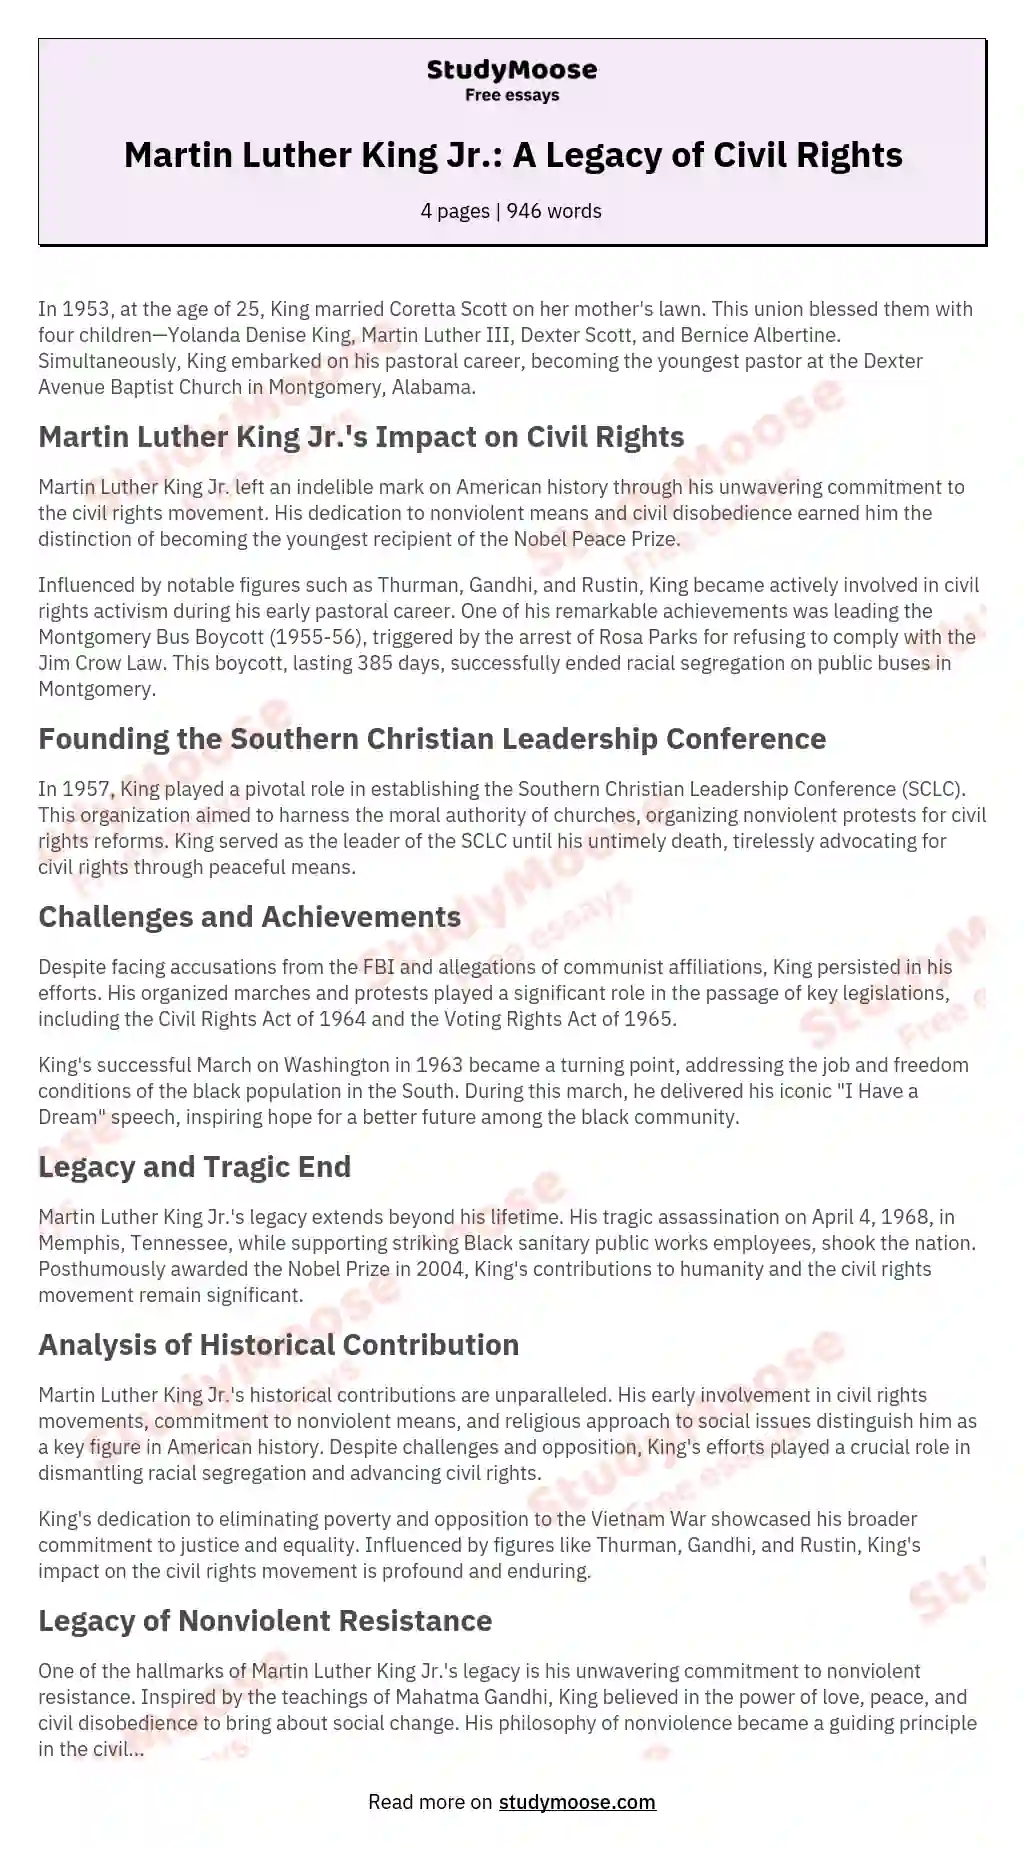 Martin Luther King Jr.: A Legacy of Civil Rights essay